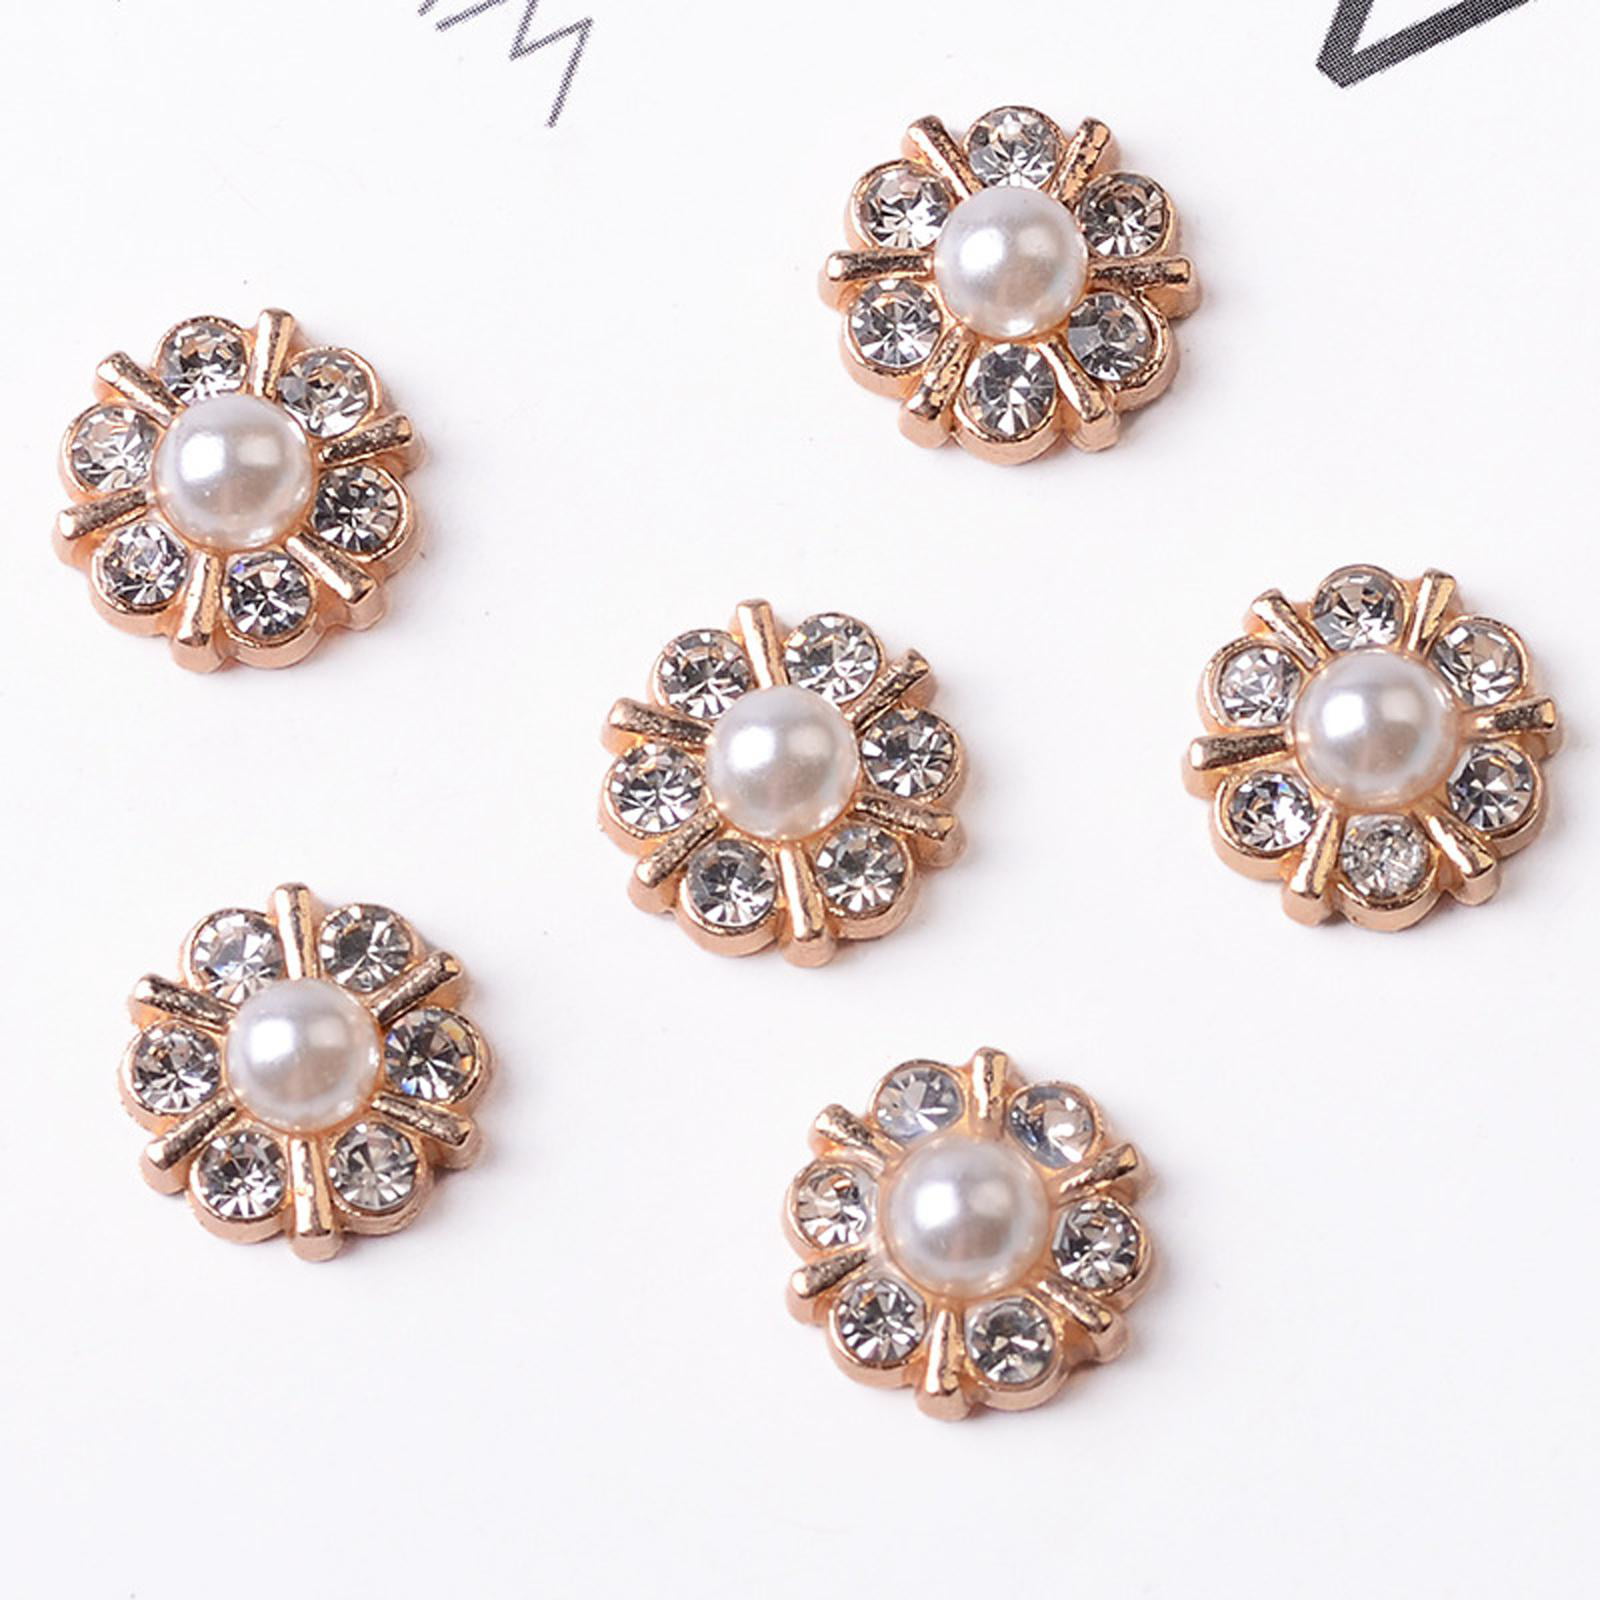 Flat Back Rhinestones Buttons Embellishments with Diamond, Sew On Crystals  Glass Rhinestone for Clothing Wedding Bouquet(20pcs) Light Green